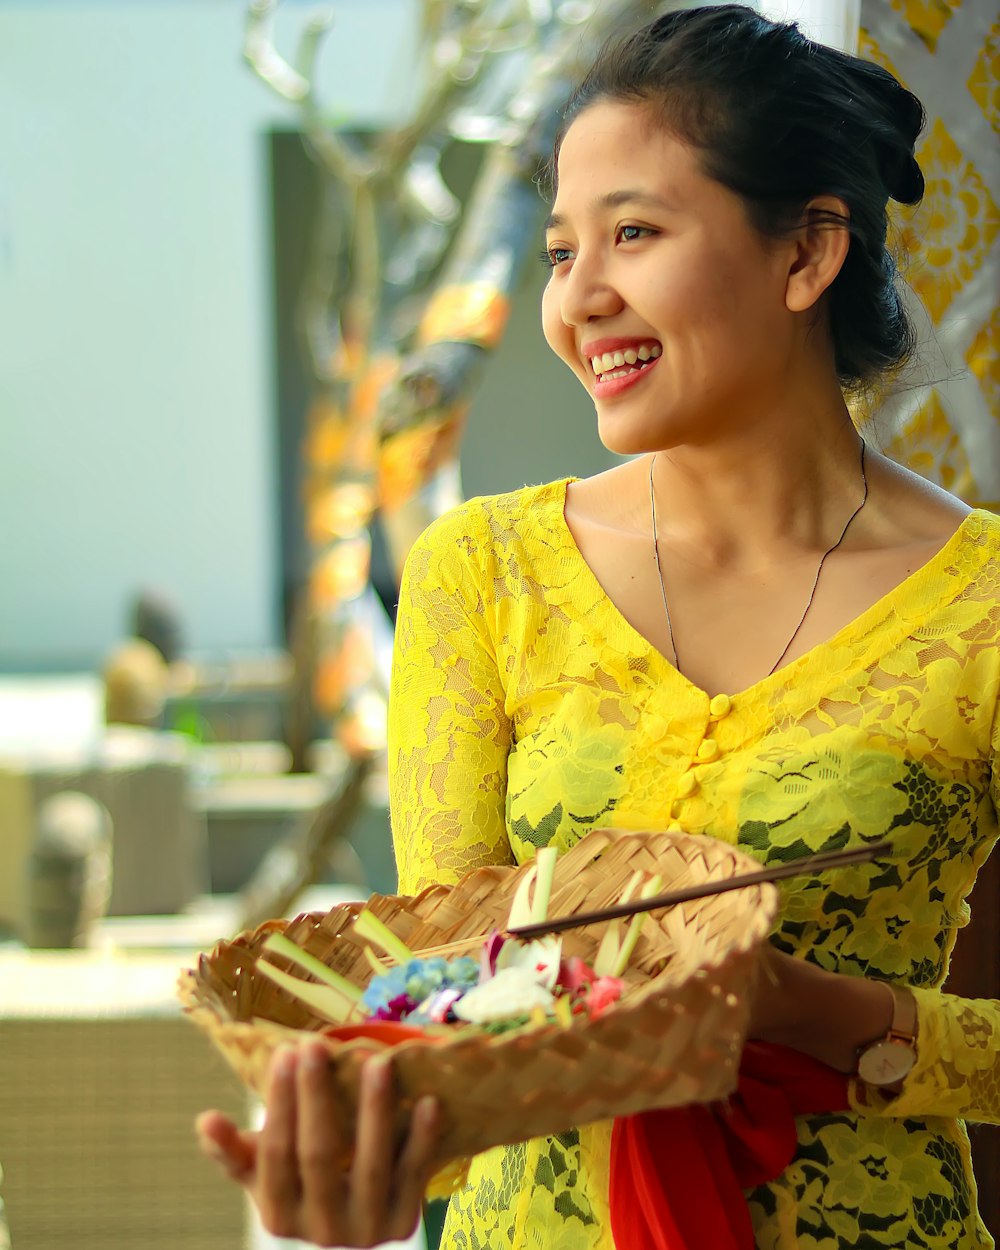 woman in yellow floral dress holding basket of fruits